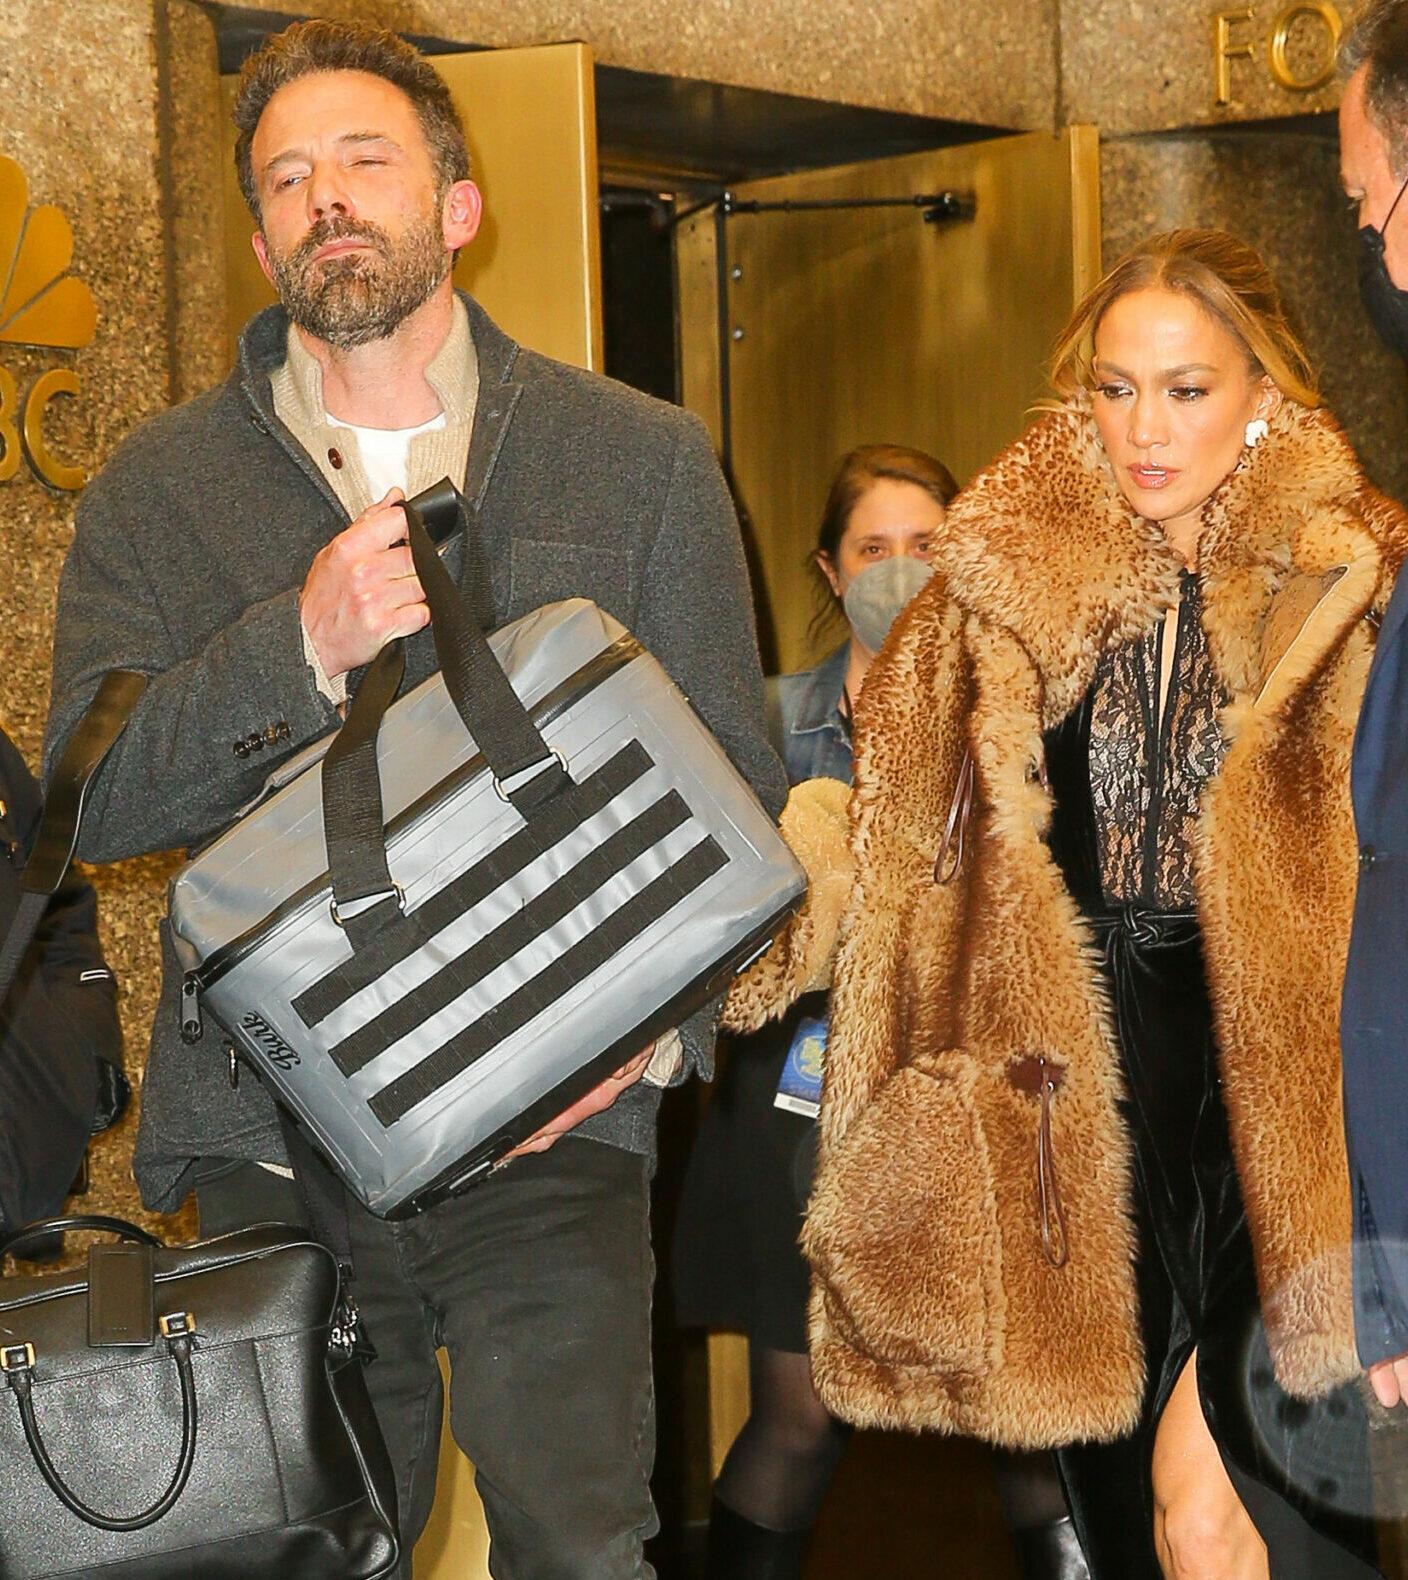 Jennifer Lopez and Ben Affleck seen leaving the NBC studios in NYC on Feb 03 2022